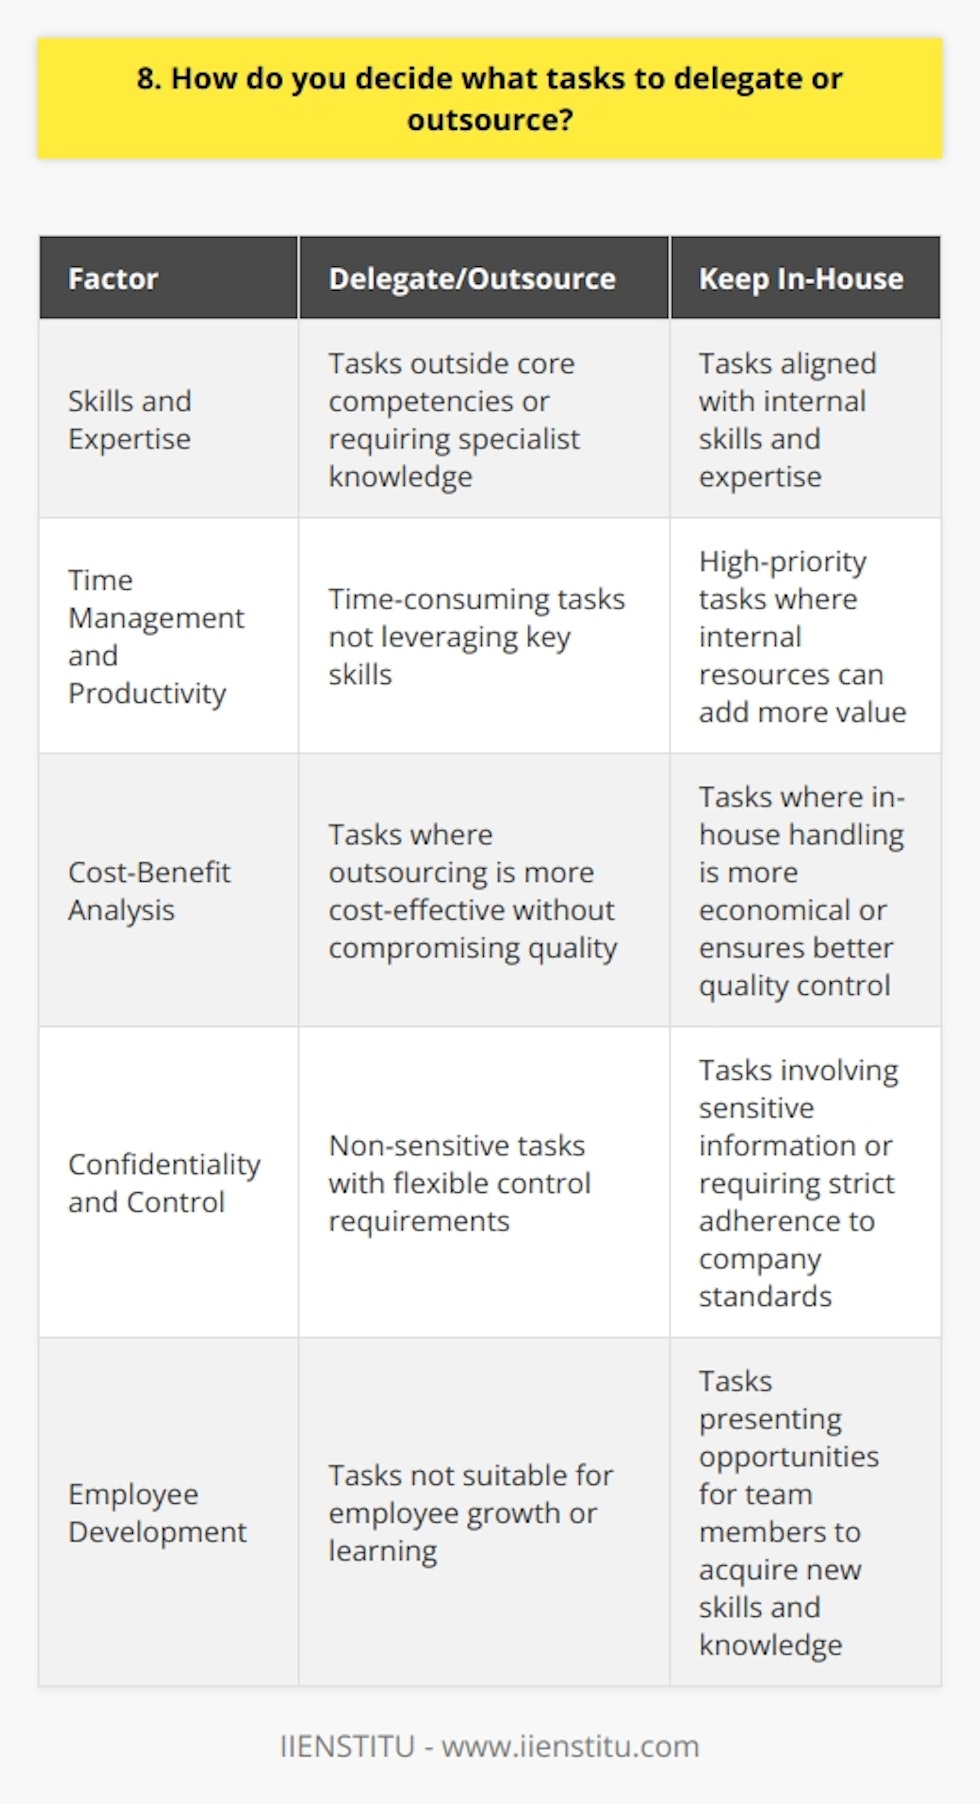 When deciding which tasks to delegate or outsource, I consider several key factors. First and foremost, I evaluate the skills and expertise required for each task. If a task falls outside my core competencies or would be more efficiently handled by a specialist, Im more likely to delegate or outsource it. Time Management and Productivity I also assess the impact on my time management and overall productivity. If a task is time-consuming but not the best use of my skills, delegating or outsourcing can free me up to focus on higher-priority responsibilities where I can add more value. Cost-Benefit Analysis Another important consideration is the cost-benefit analysis. I weigh the financial implications of handling a task in-house versus outsourcing. If outsourcing proves to be more cost-effective without compromising quality, it becomes a viable option. Confidentiality and Control However, Im cautious about delegating or outsourcing tasks that involve sensitive information or require a high level of control. In such cases, I prefer to keep the work in-house to maintain confidentiality and ensure alignment with company standards. Employee Development Lastly, I consider the potential for employee development when deciding whether to delegate. If a task presents an opportunity for a team member to learn and grow, I may choose to delegate it internally, providing guidance and support as needed. Ultimately, my decision to delegate or outsource is based on a careful assessment of each tasks requirements, impact on productivity, cost-effectiveness, and alignment with company goals and employee development.